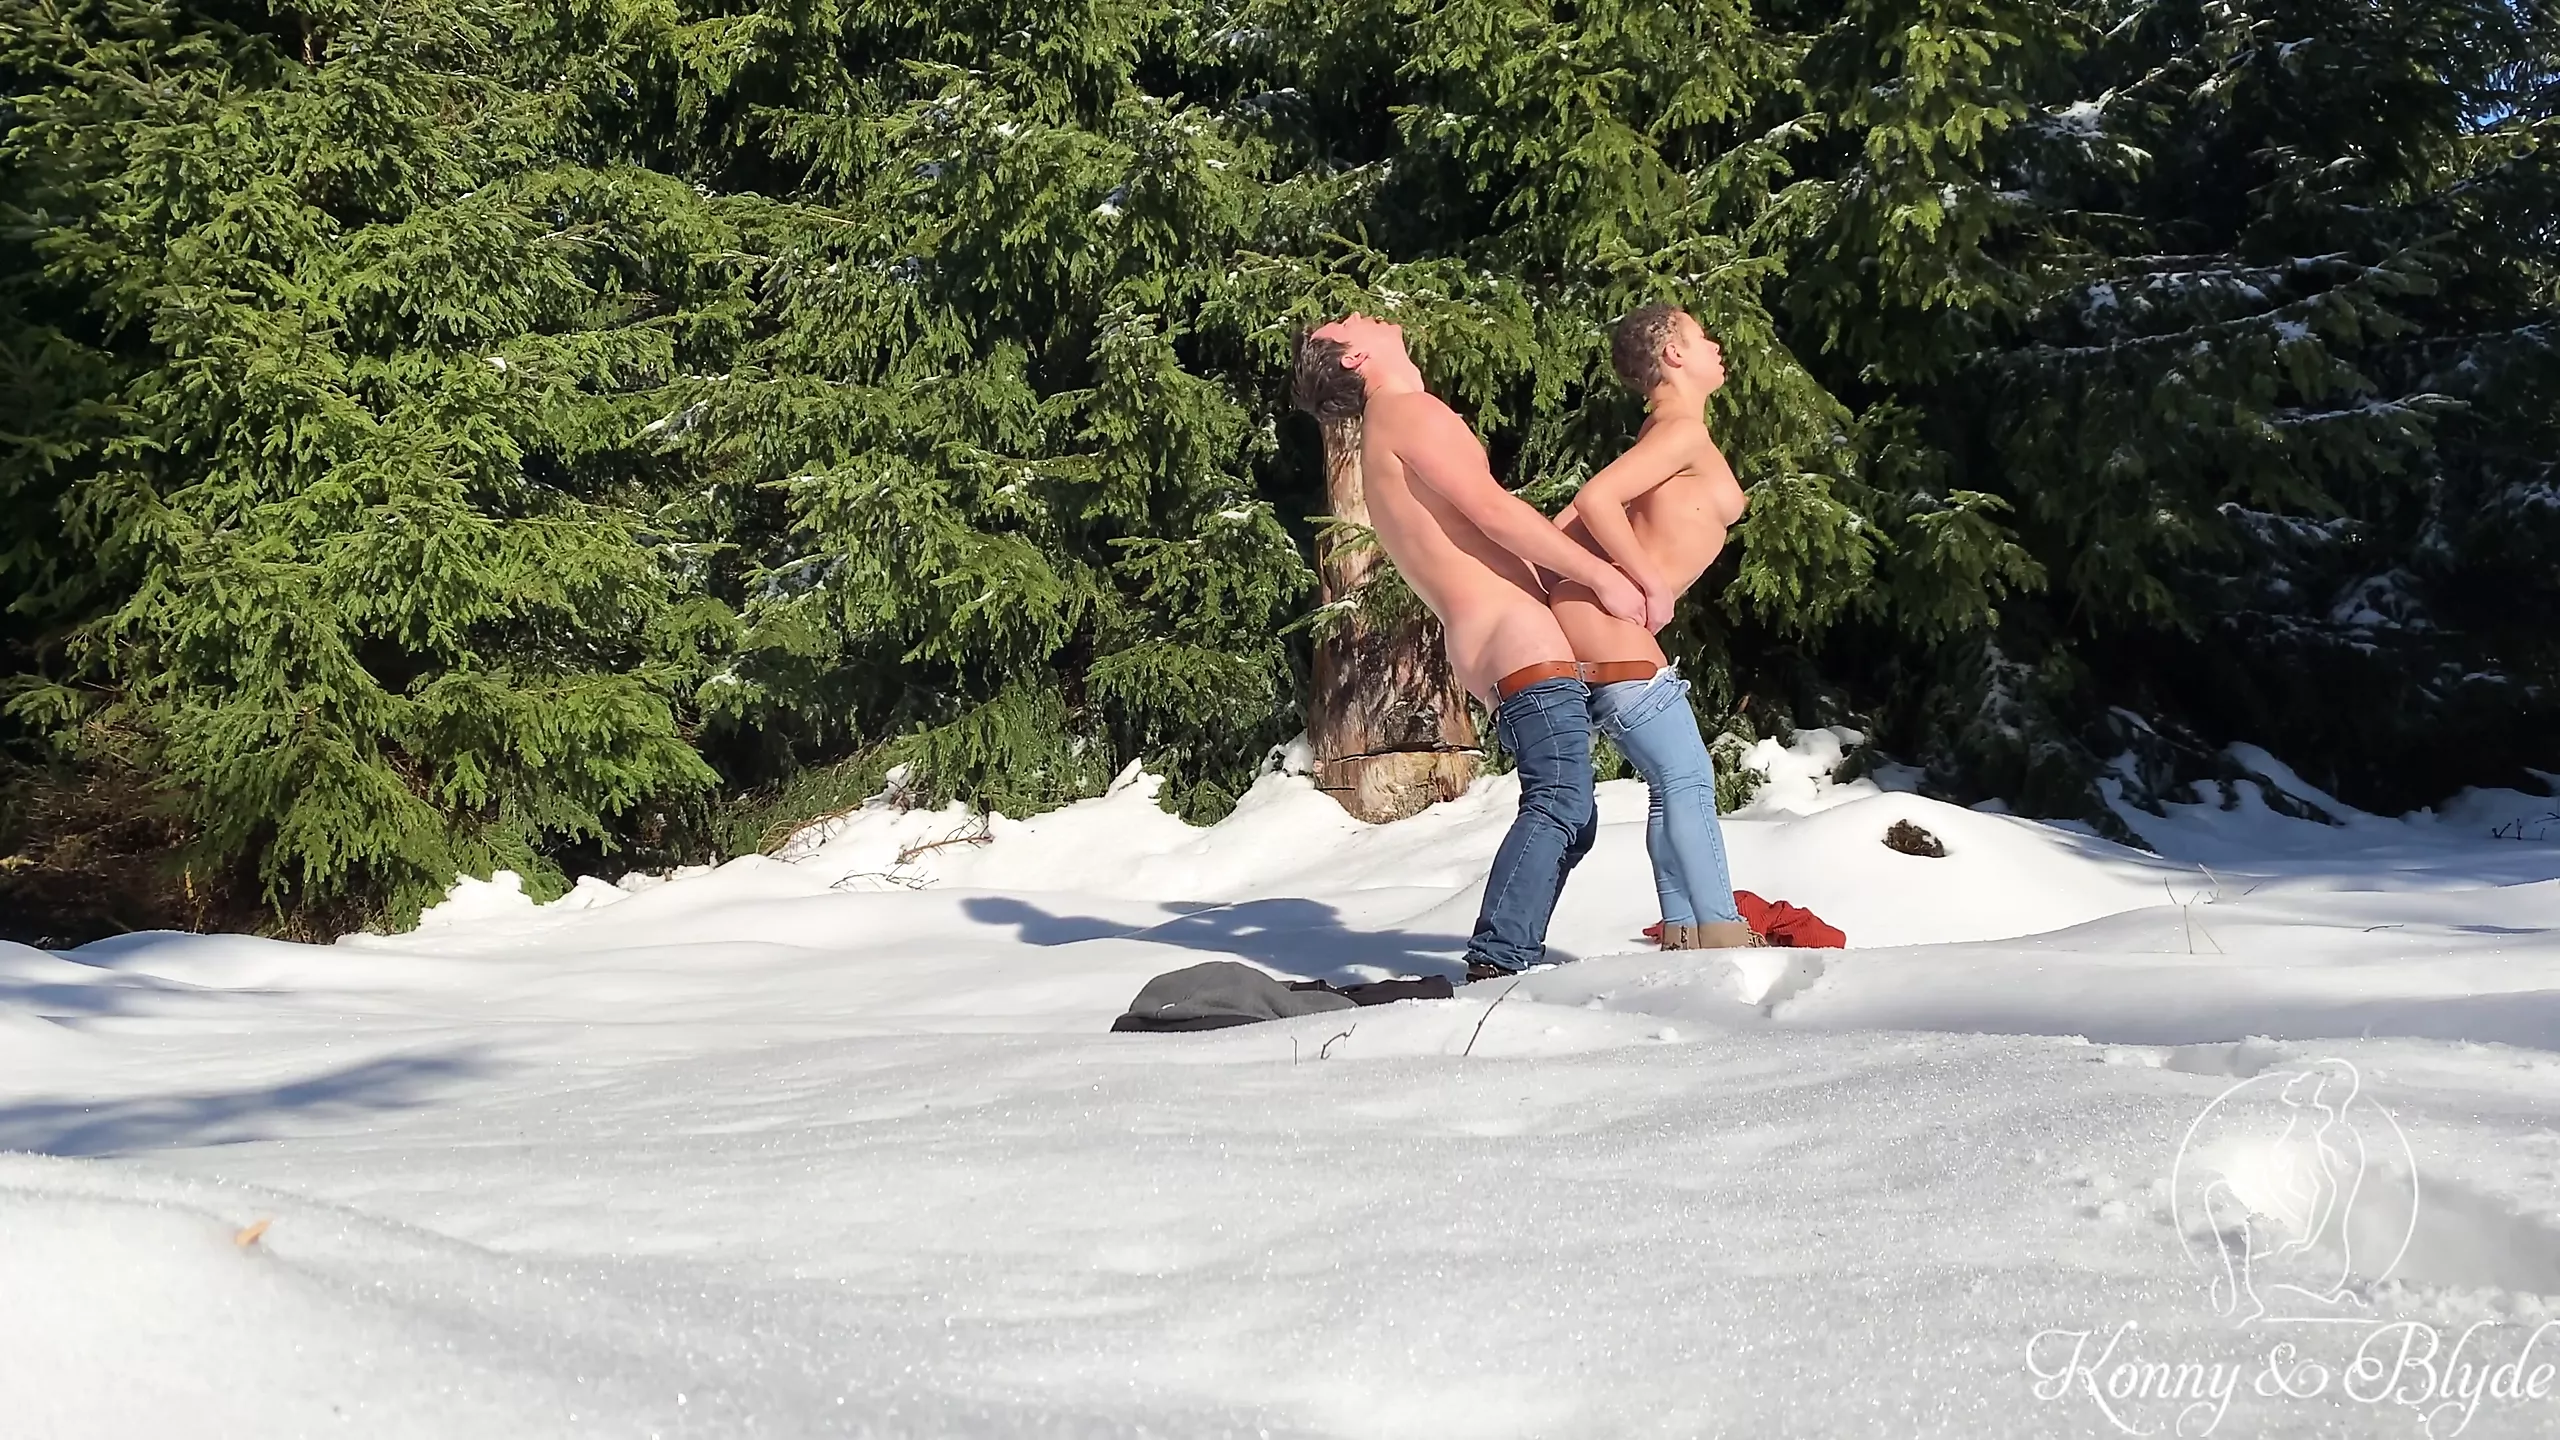 Konny and Blyde Having Sex in a Snowy Winter Forest in Public Almost got Caught xHamster